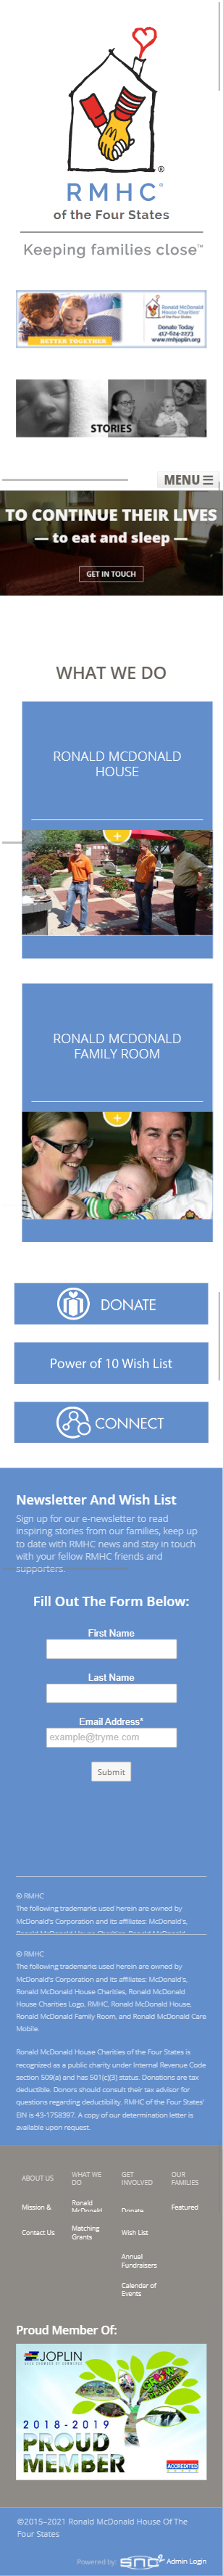 Charity Mobile Website